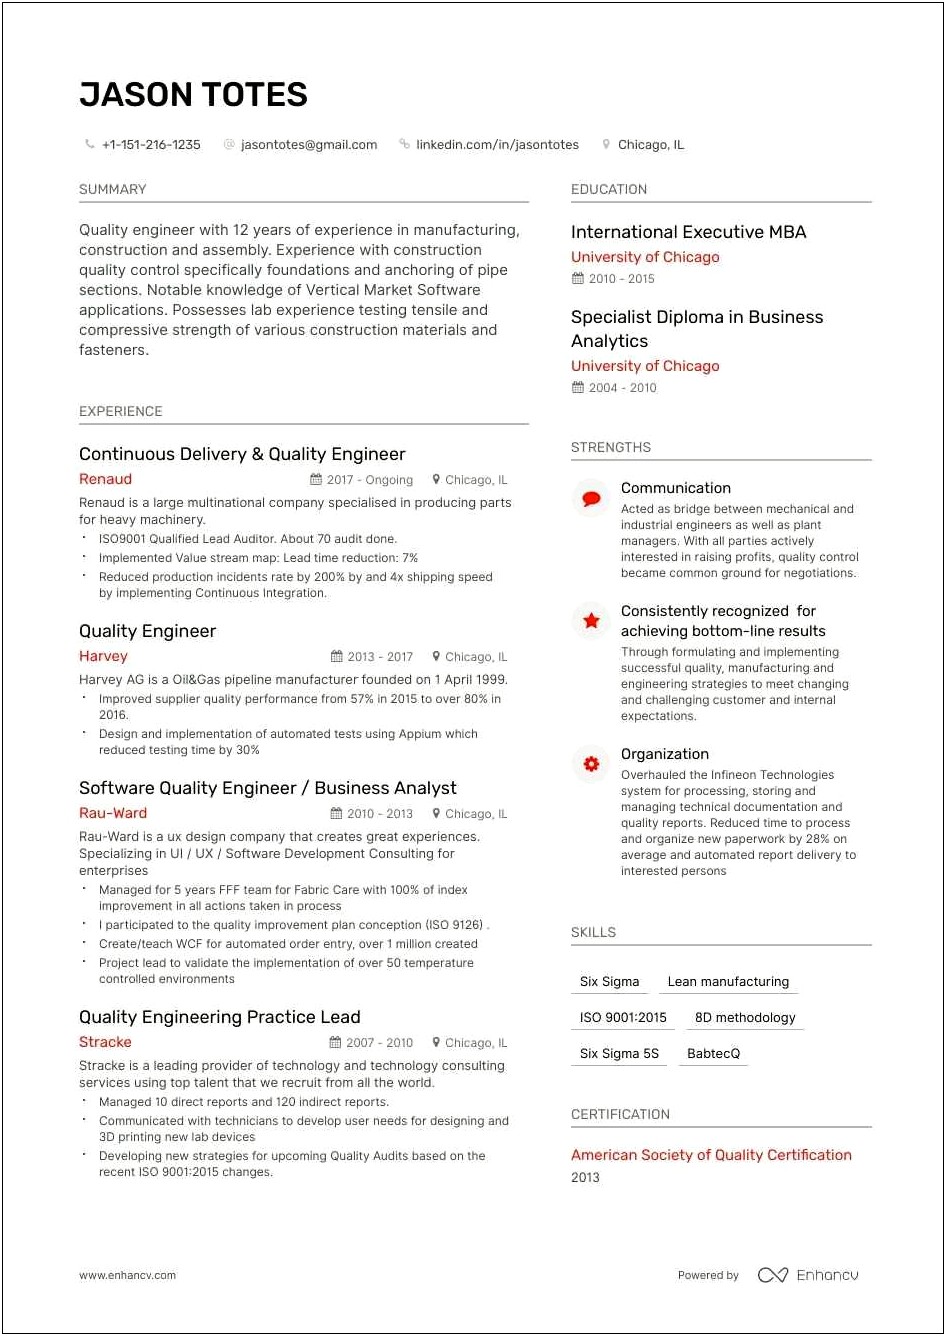 Career Objective In Resume For Test Engineer